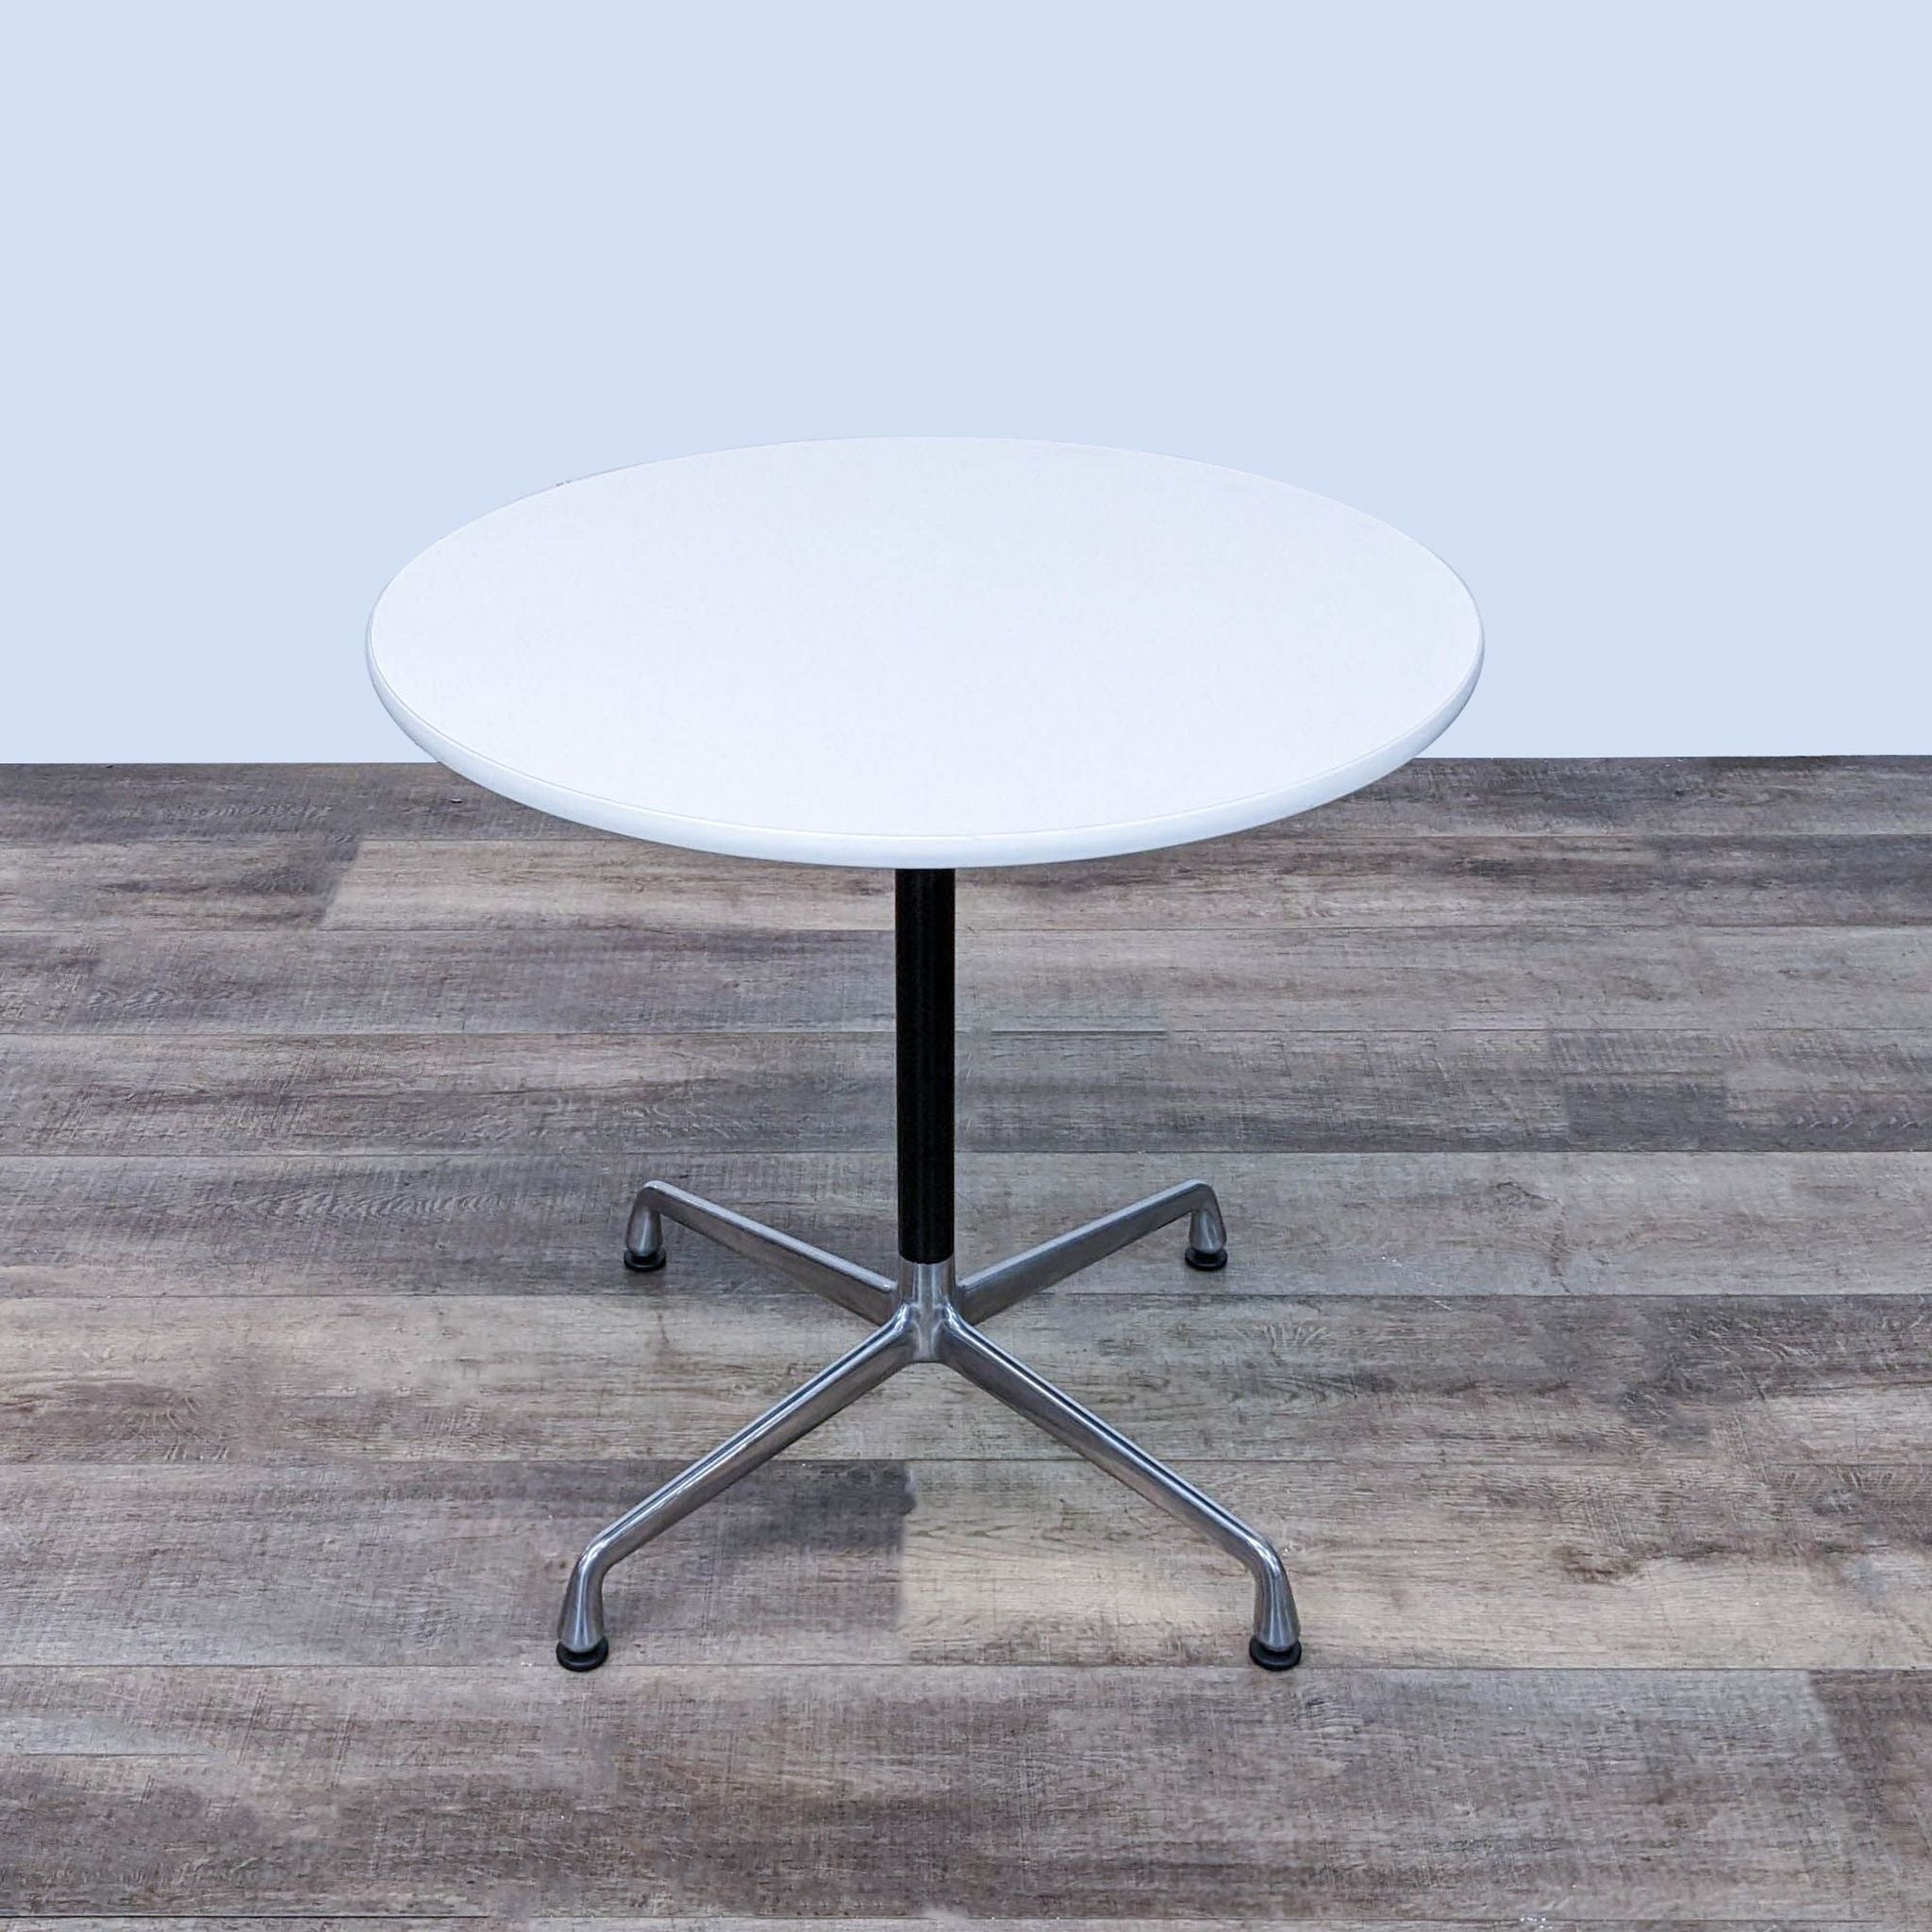 Modern Herman Miller Eames dining table, round white top, black and chrome base, depicted in an interior setting.